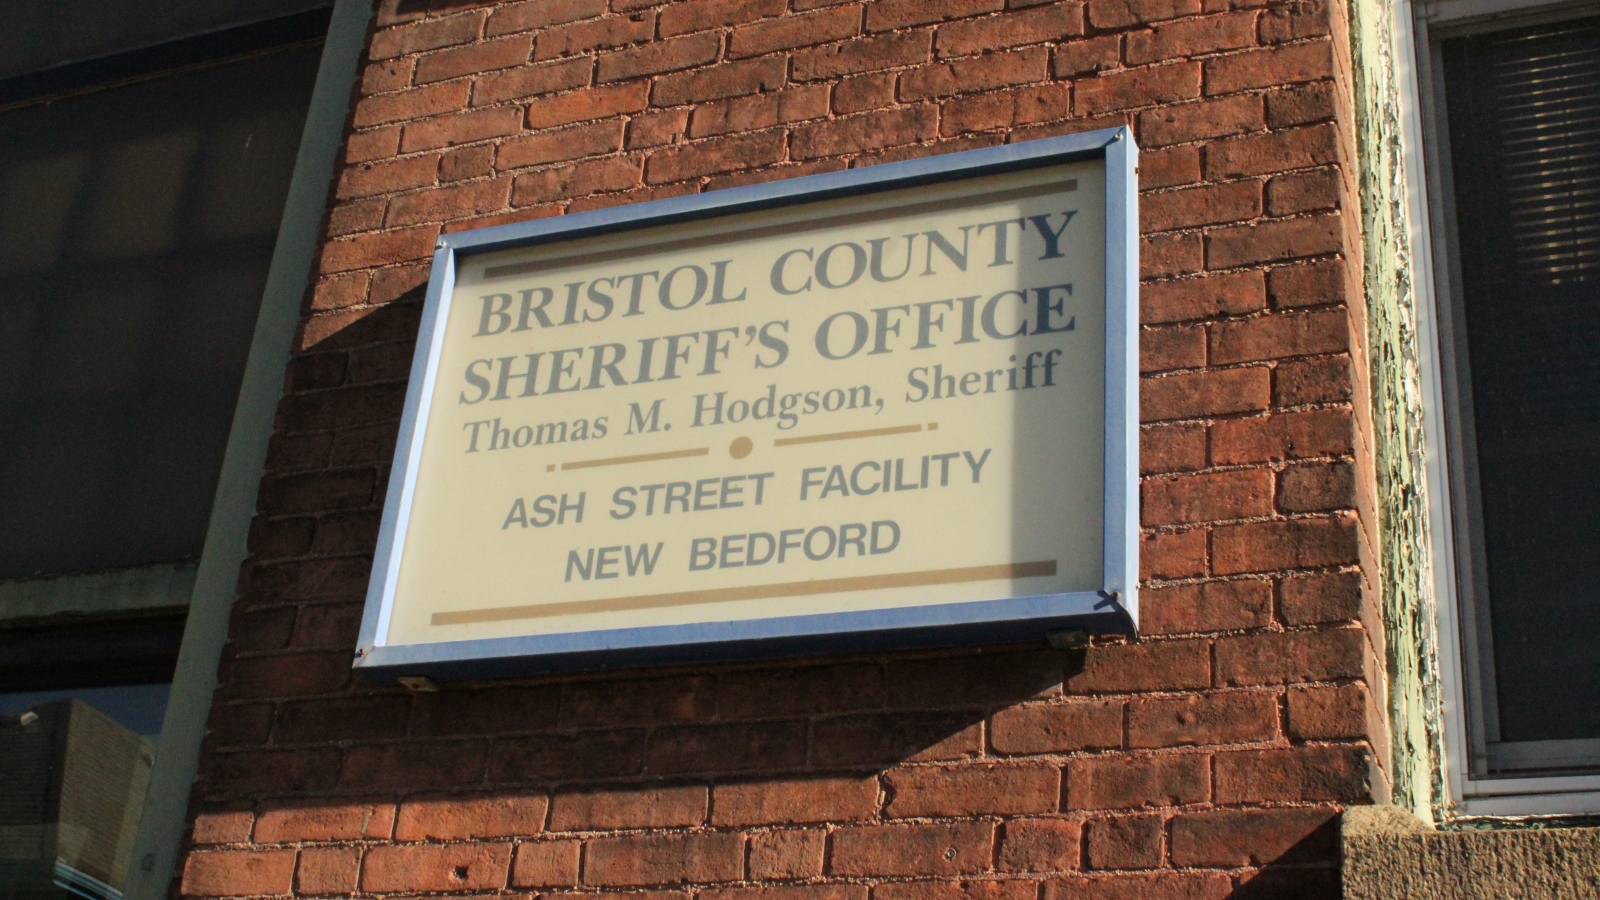 The Ash Street Jail in New Bedford is one of two county jails managed by Bristol County Sheriff Thomas Hodgson.